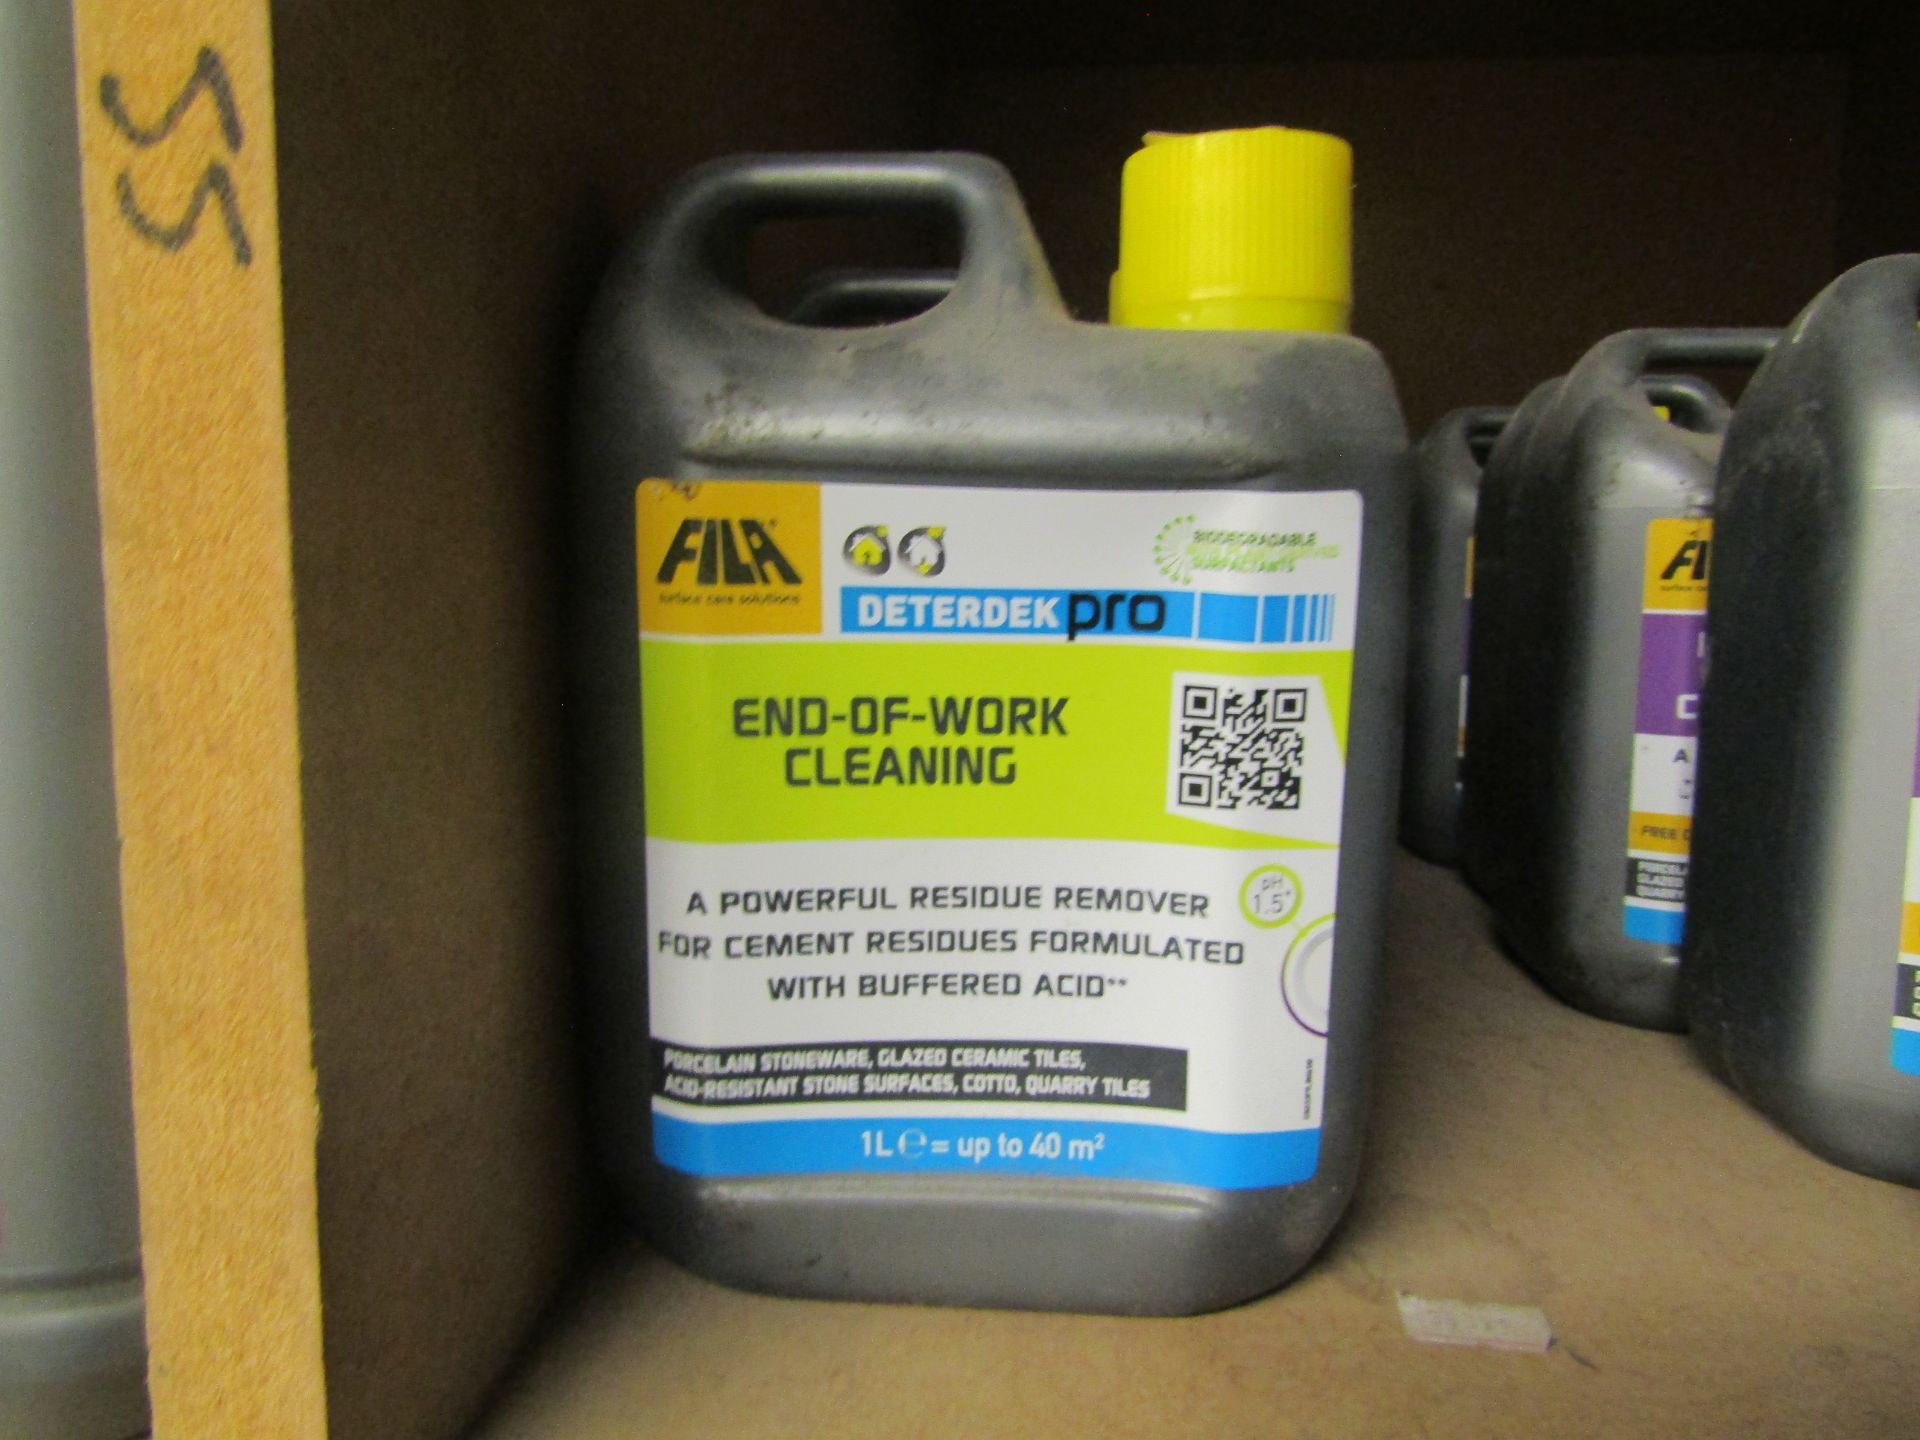 2x Fila 1L - Up To 40m Deterdek Pro End-Of-Work Cleaning, A Powerful Residue Remover For Cement